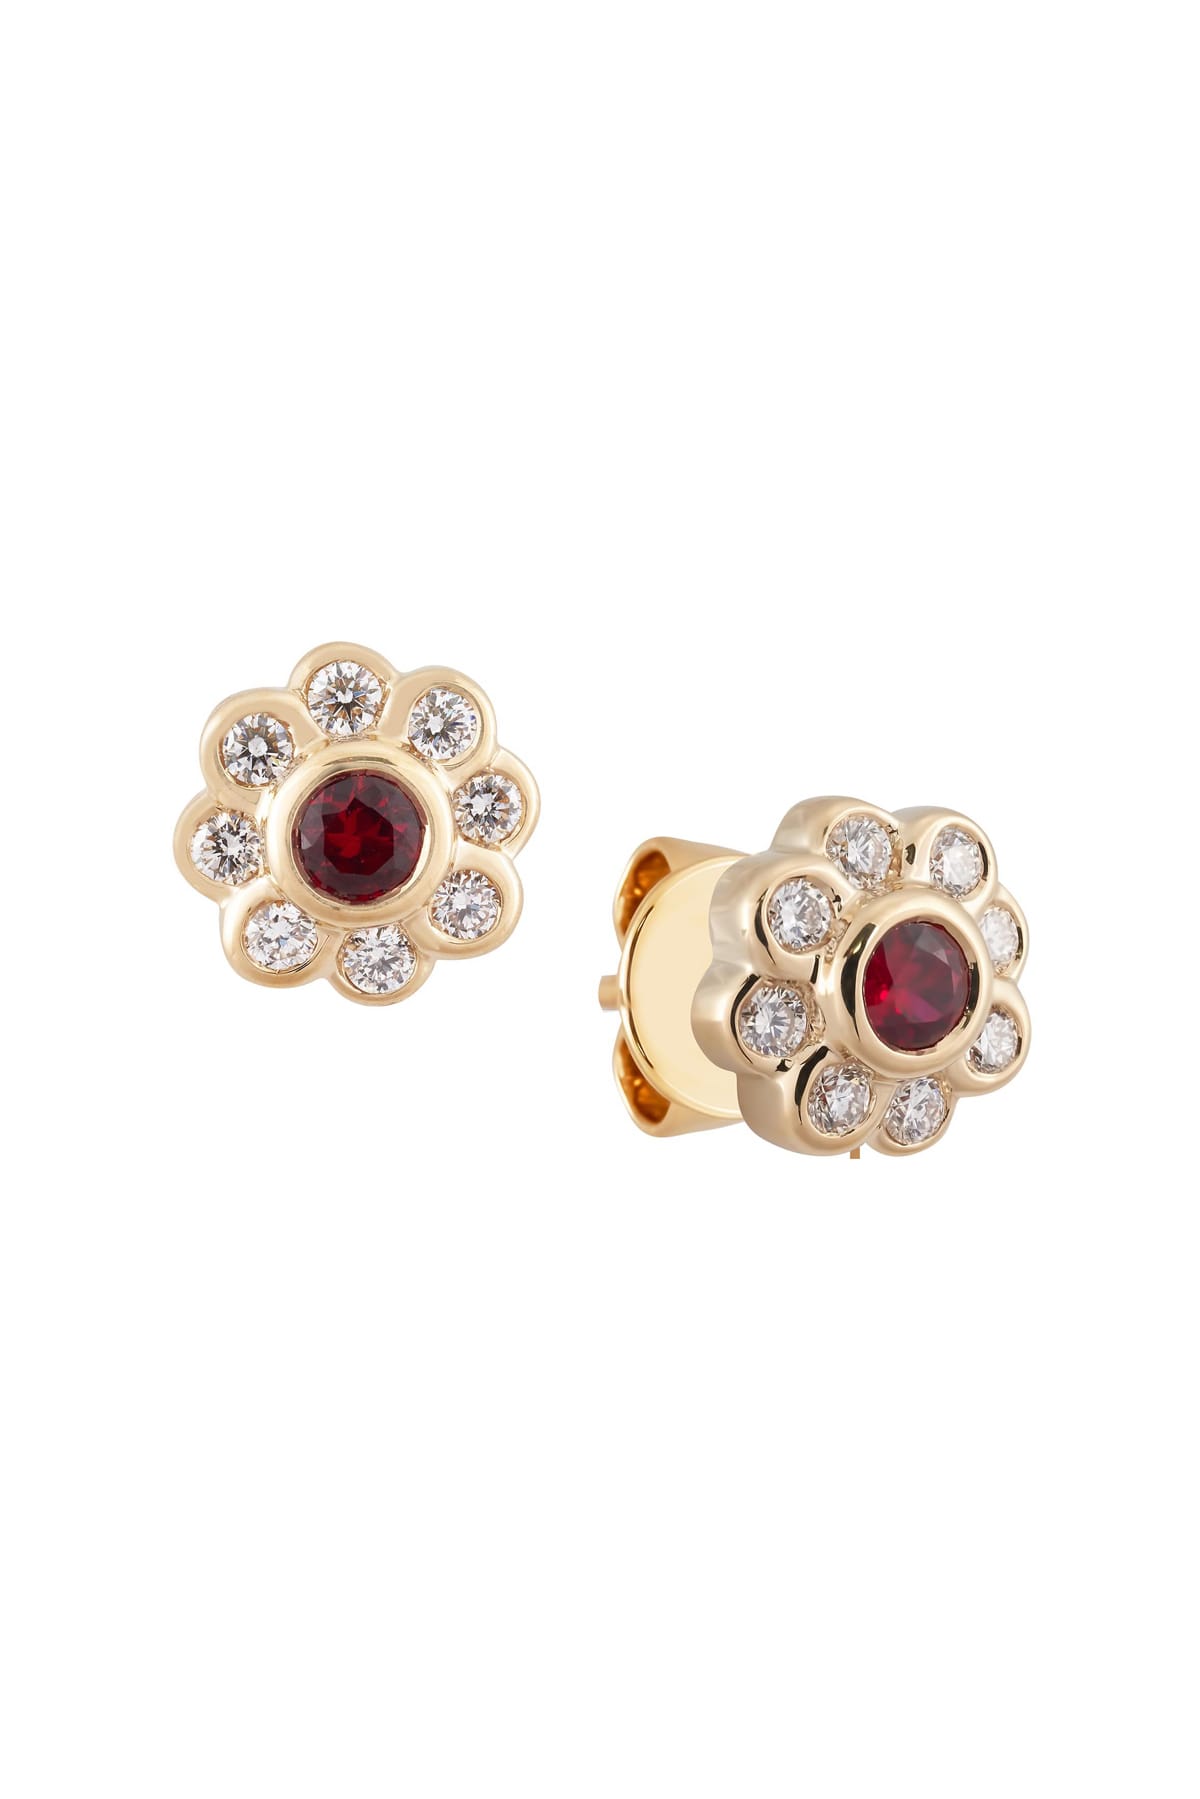 Round Ruby and Diamond Set Cluster Stud Earrings set in 18ct Yellow Gold available at LeGassick Diamonds and Jewellery Gold Coast, Australia.